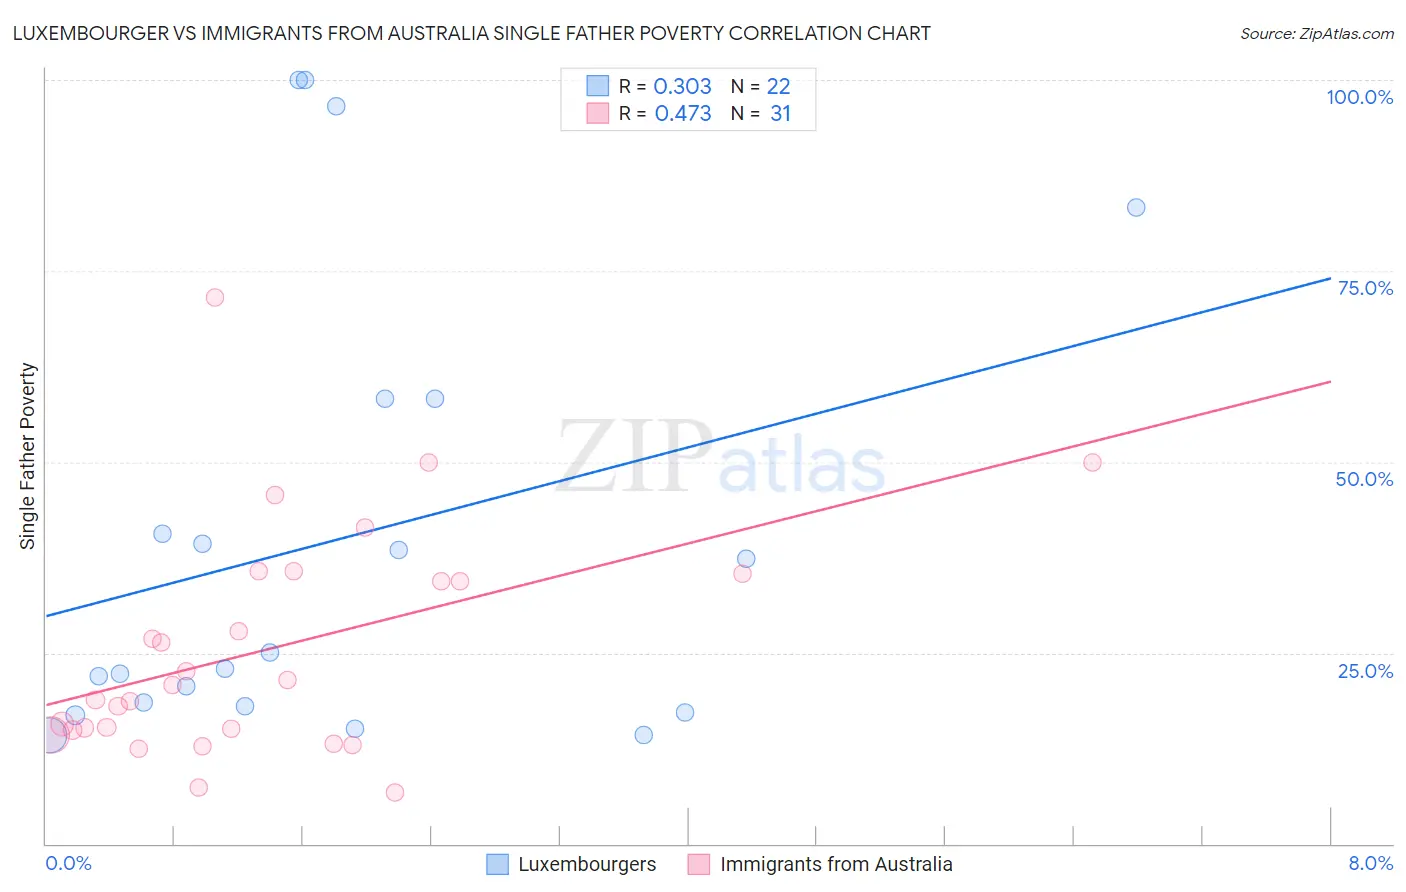 Luxembourger vs Immigrants from Australia Single Father Poverty